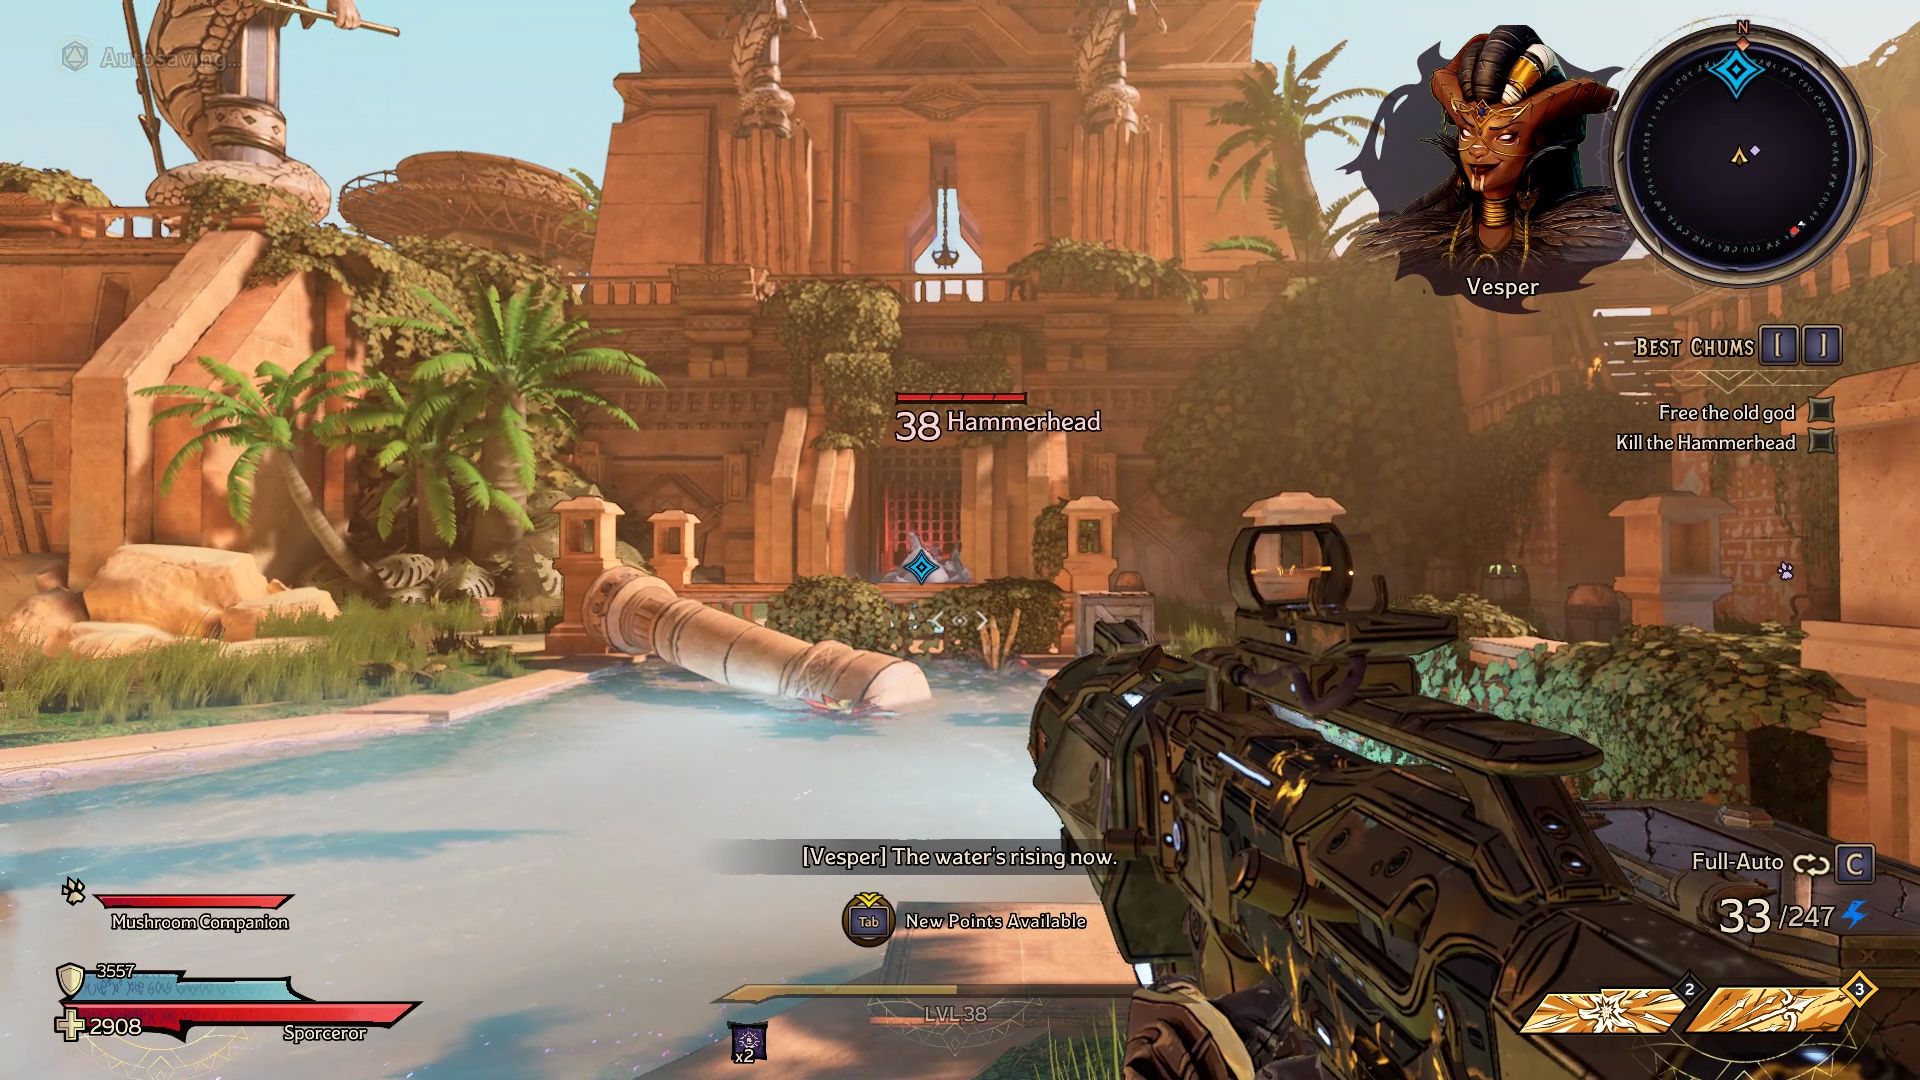 A player aims at a Hammerhead enemy in a desert oasis area filled with ruins